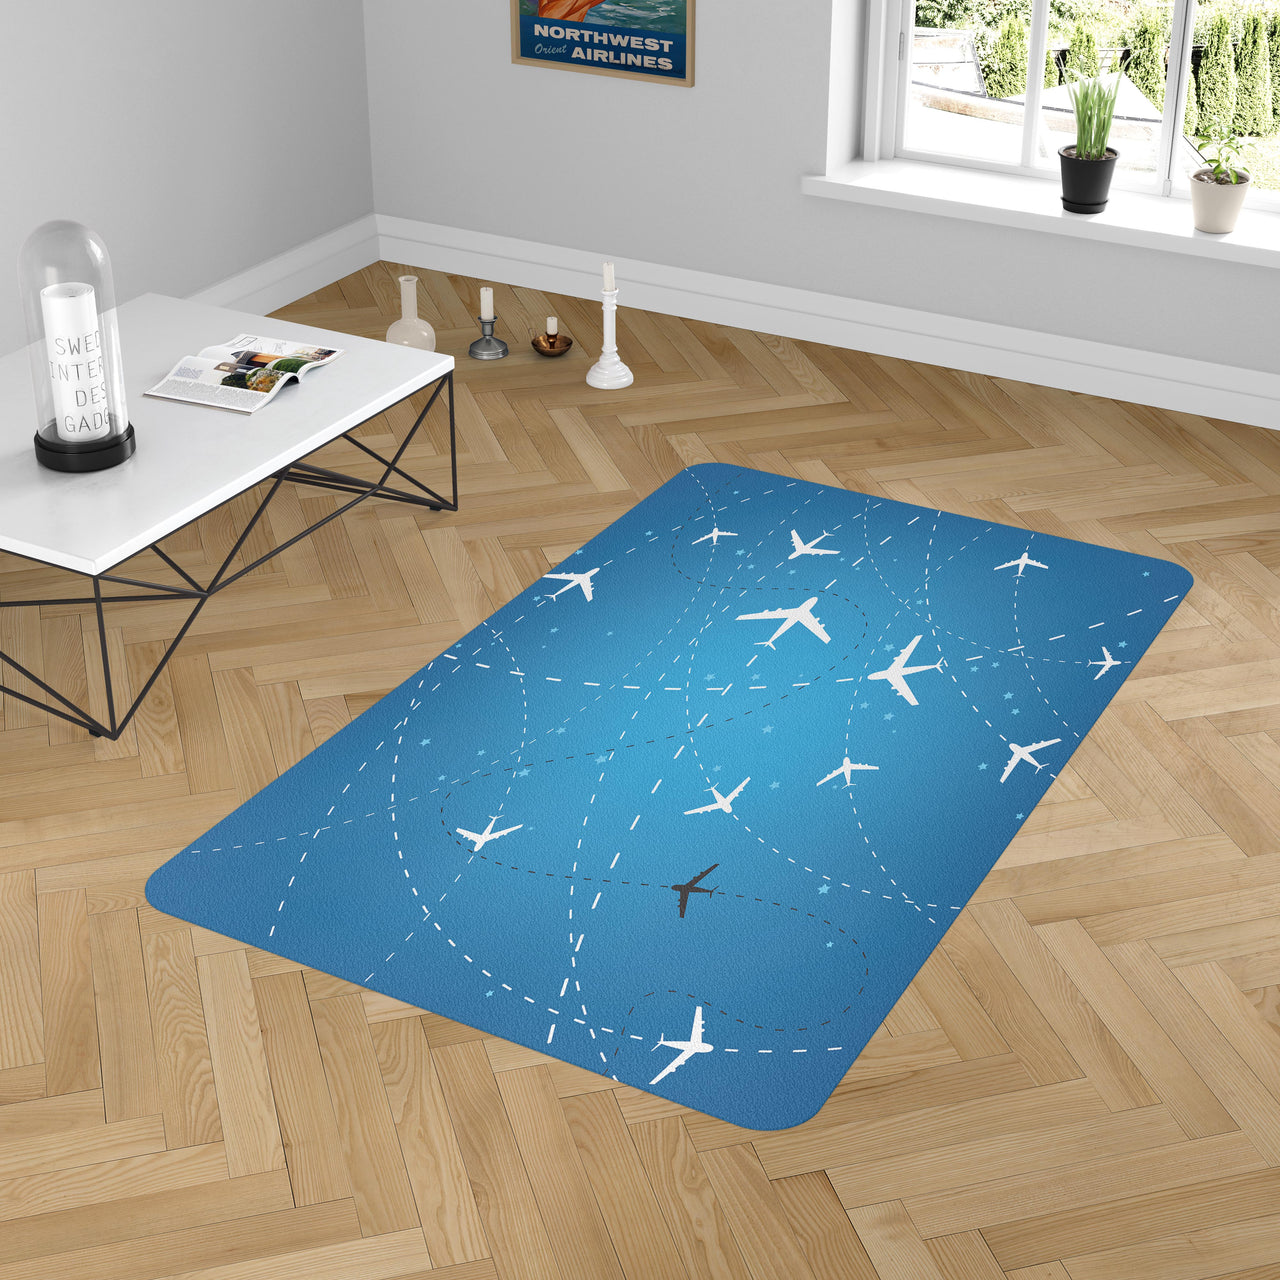 Travelling with Aircraft Designed Carpet & Floor Mats